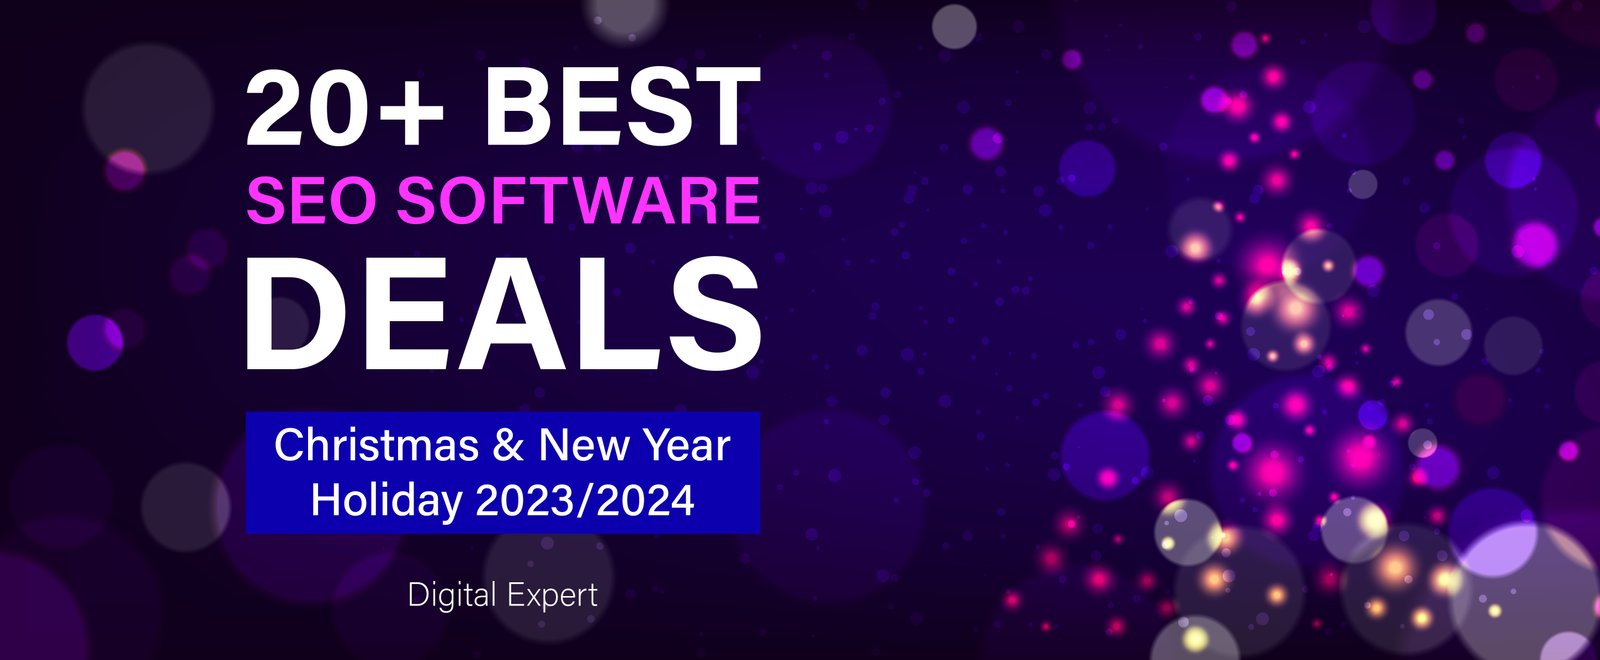 20+ Christmas & New Year Holiday SEO Software Deals 2023/2024